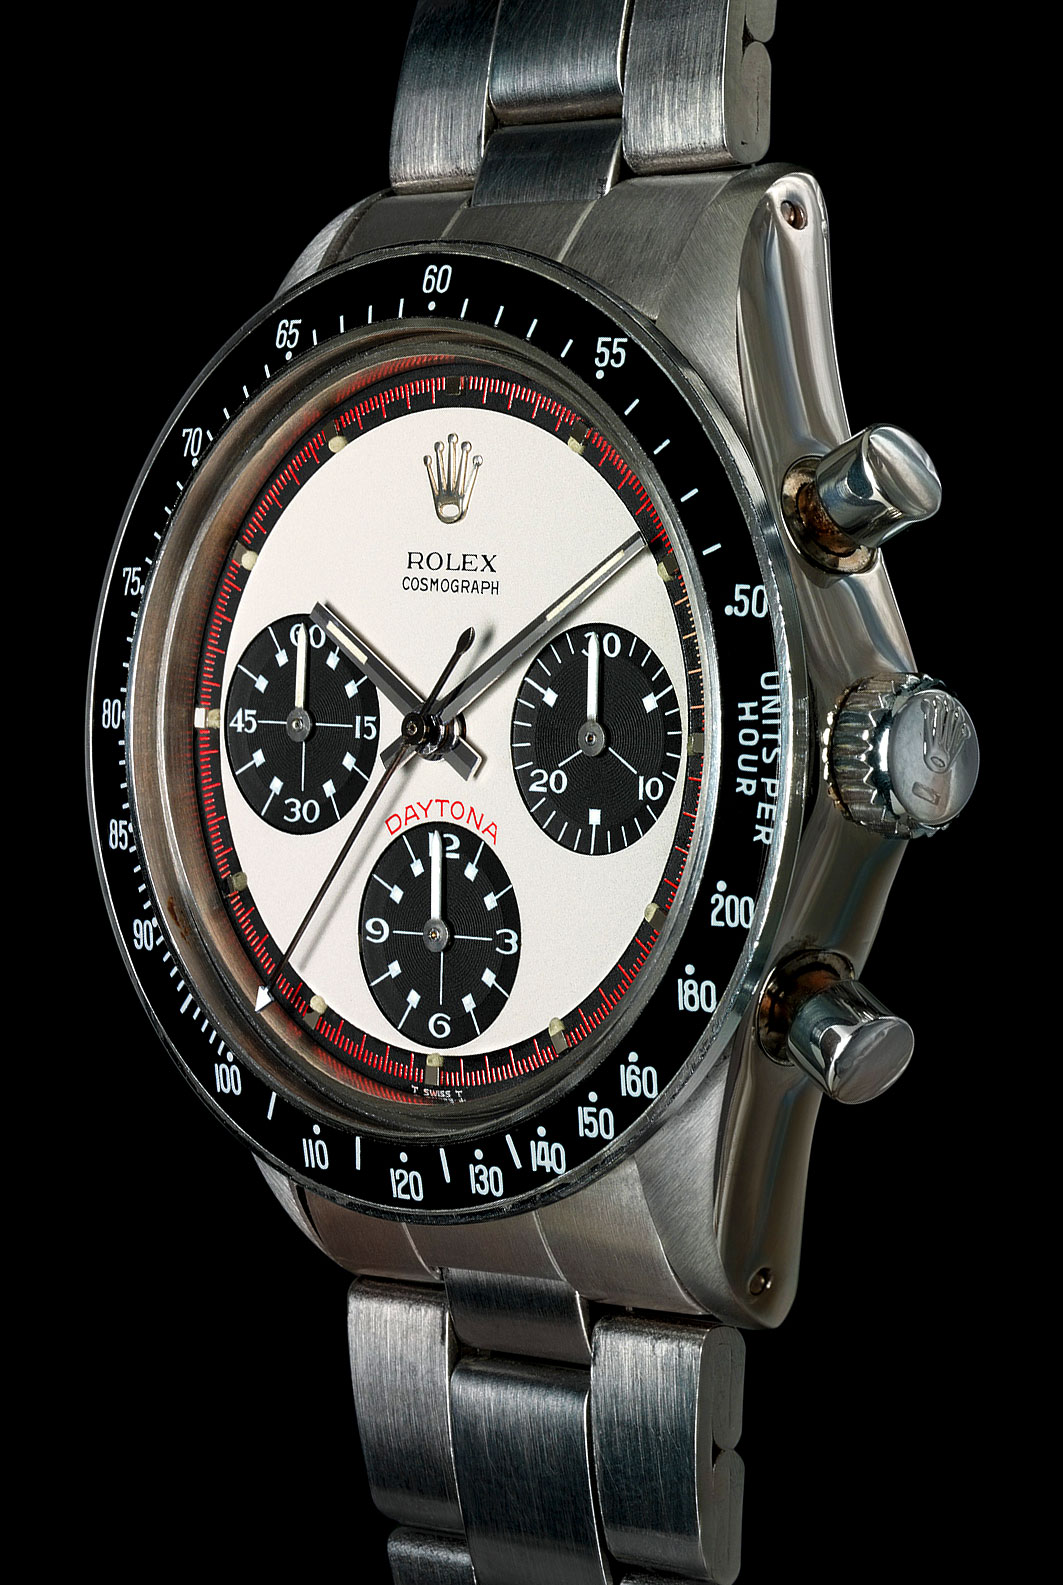 Paul-Newman-Exotic-Dial-Rolex-Daytona-Reference-6264-Red-White-and-Black-dial.jpg